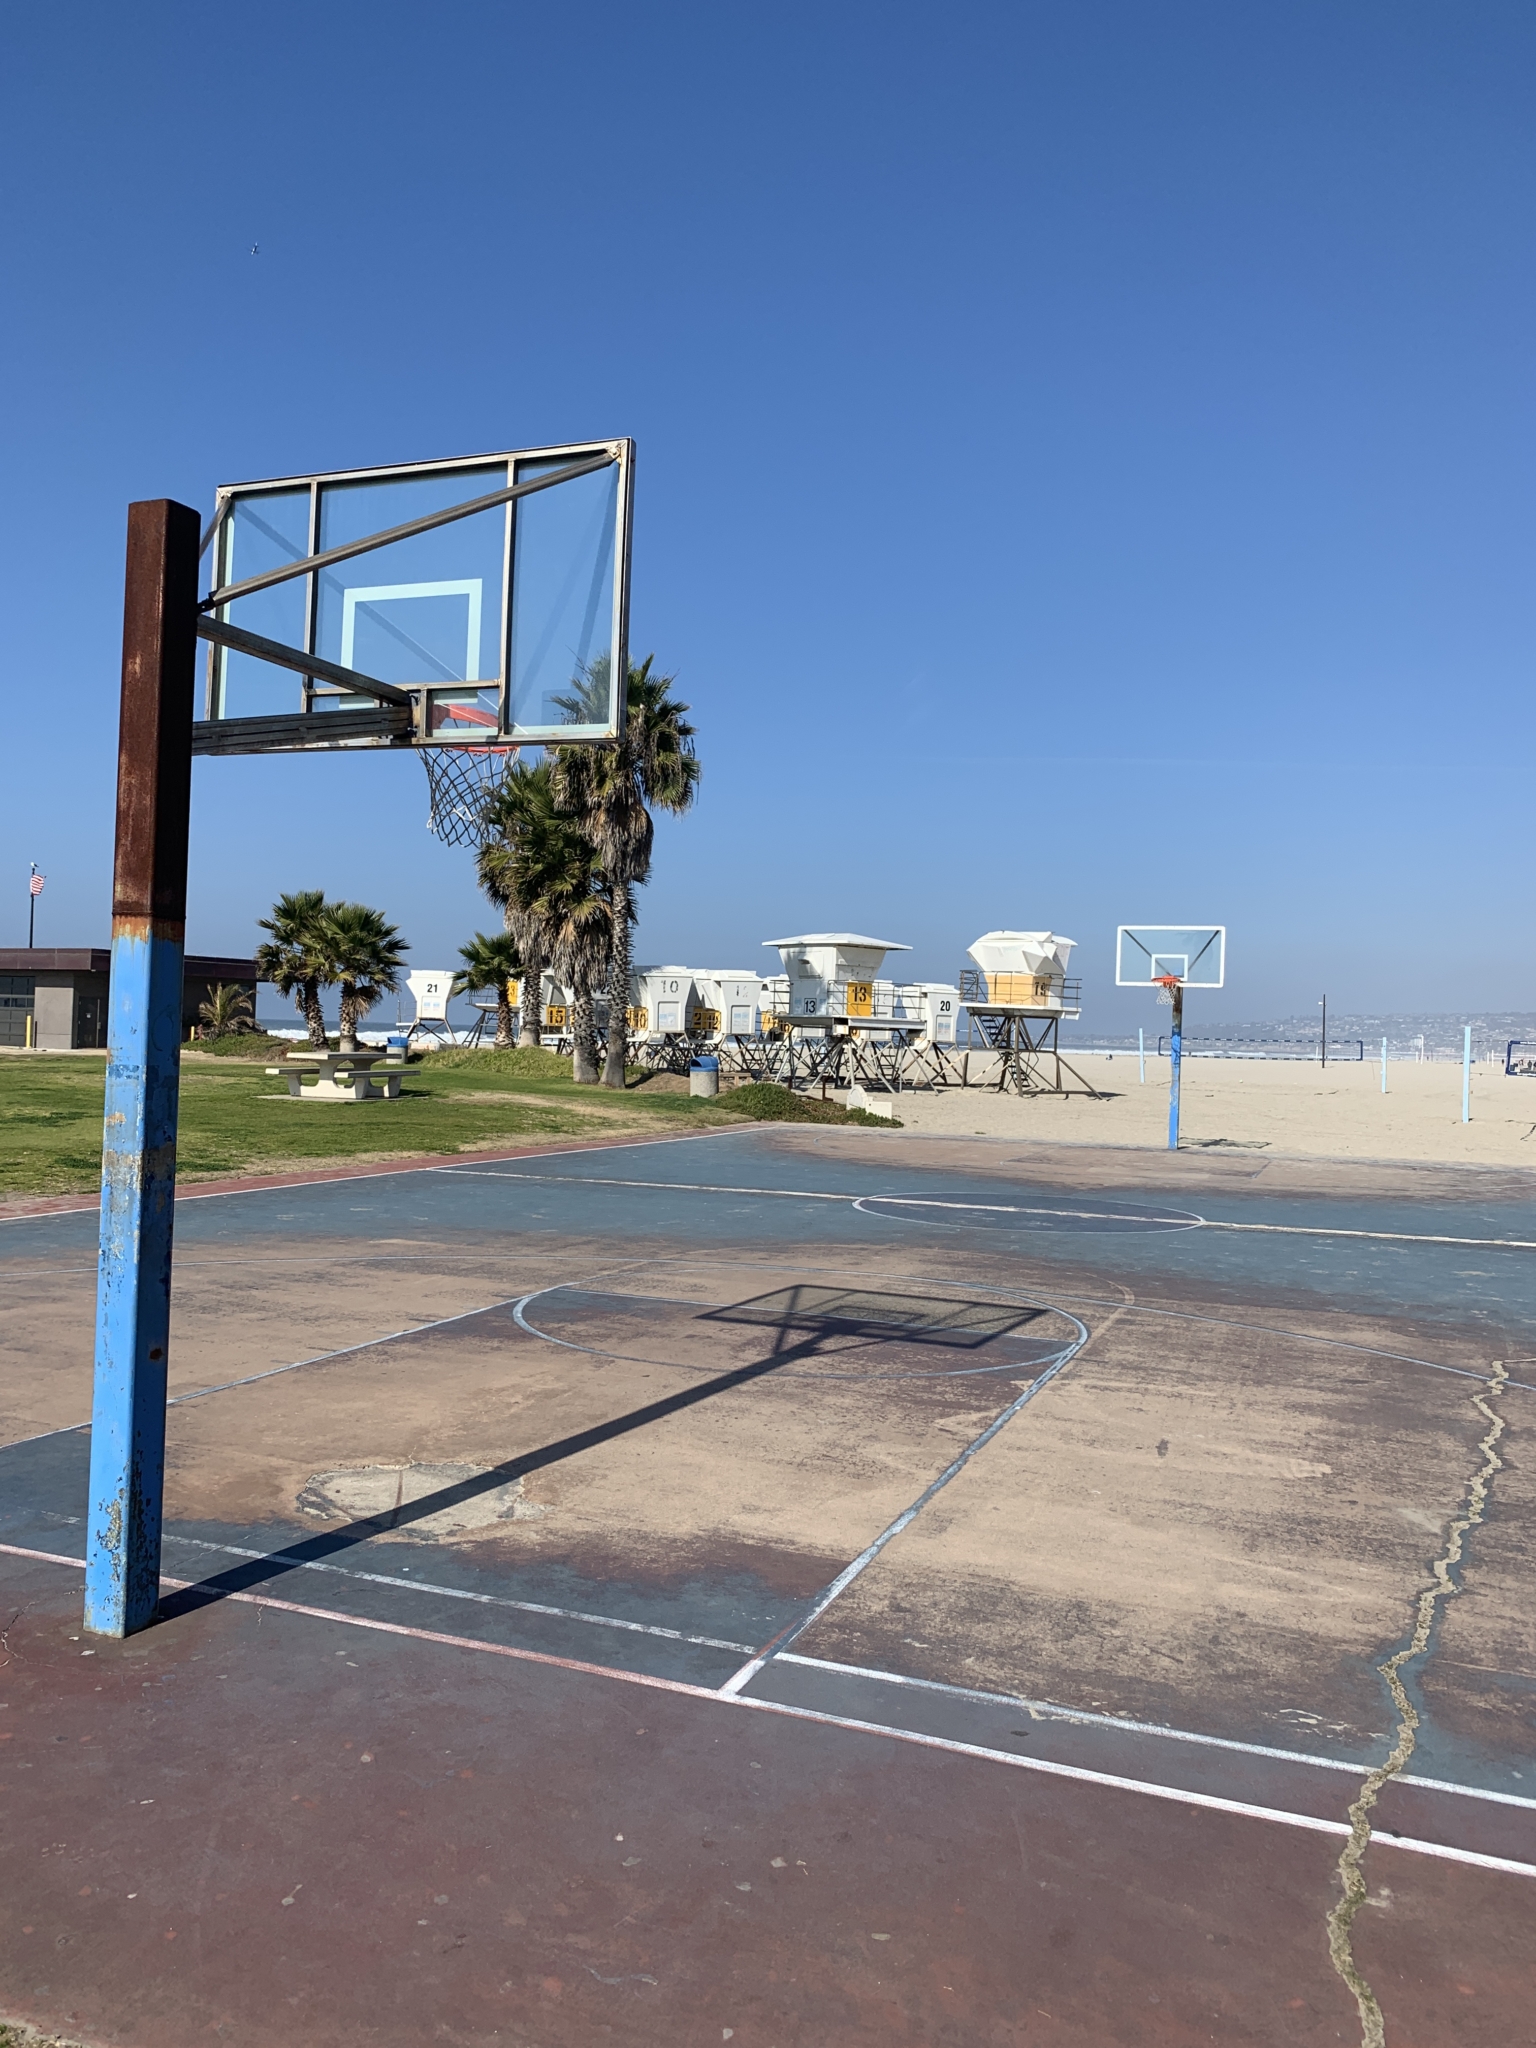 5 Most Beachin Basketball Courts in San Diego Courts of the World